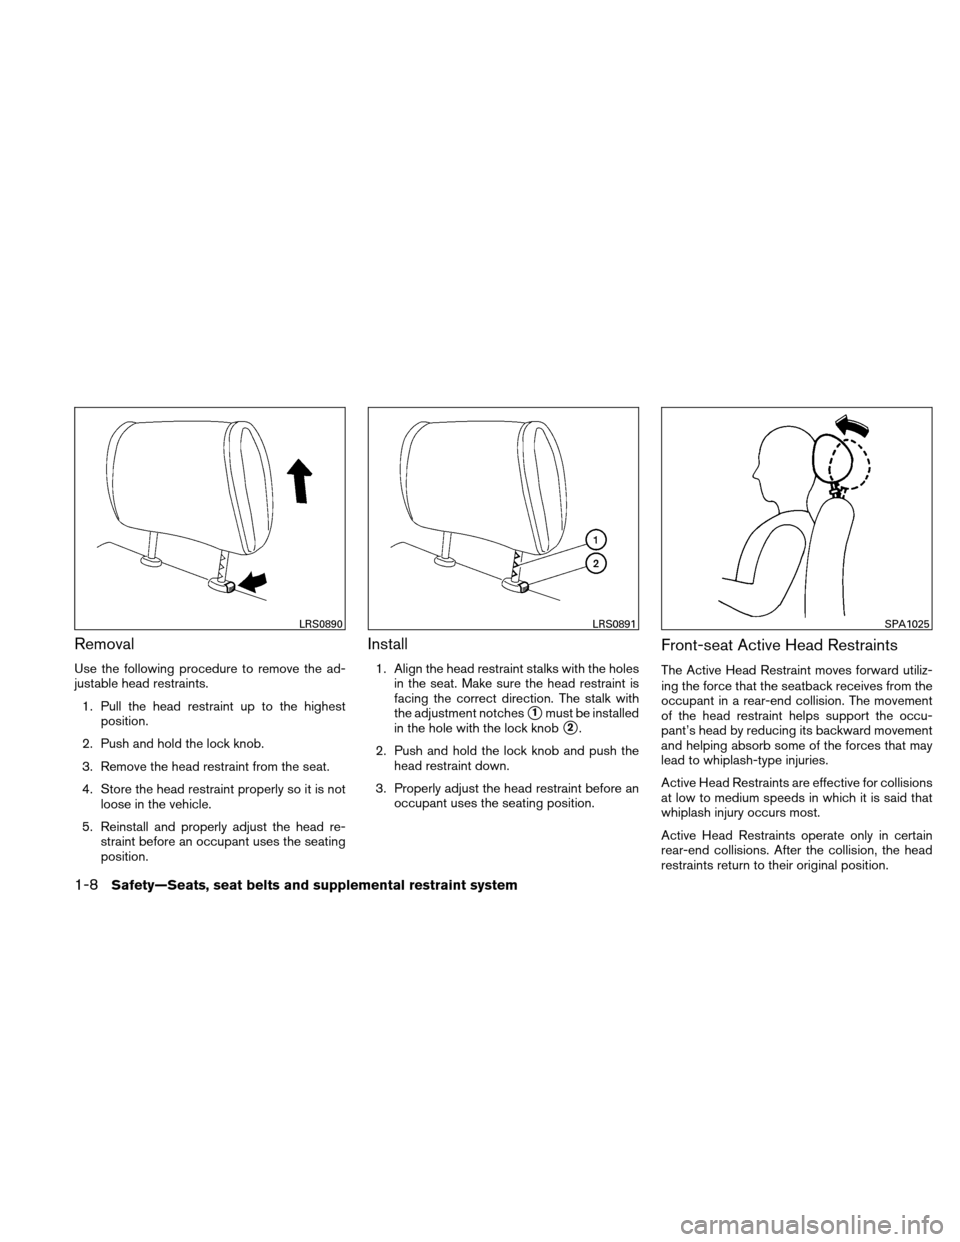 NISSAN VERSA HATCHBACK 2010 1.G Owners Manual Removal
Use the following procedure to remove the ad-
justable head restraints.1. Pull the head restraint up to the highest position.
2. Push and hold the lock knob.
3. Remove the head restraint from 